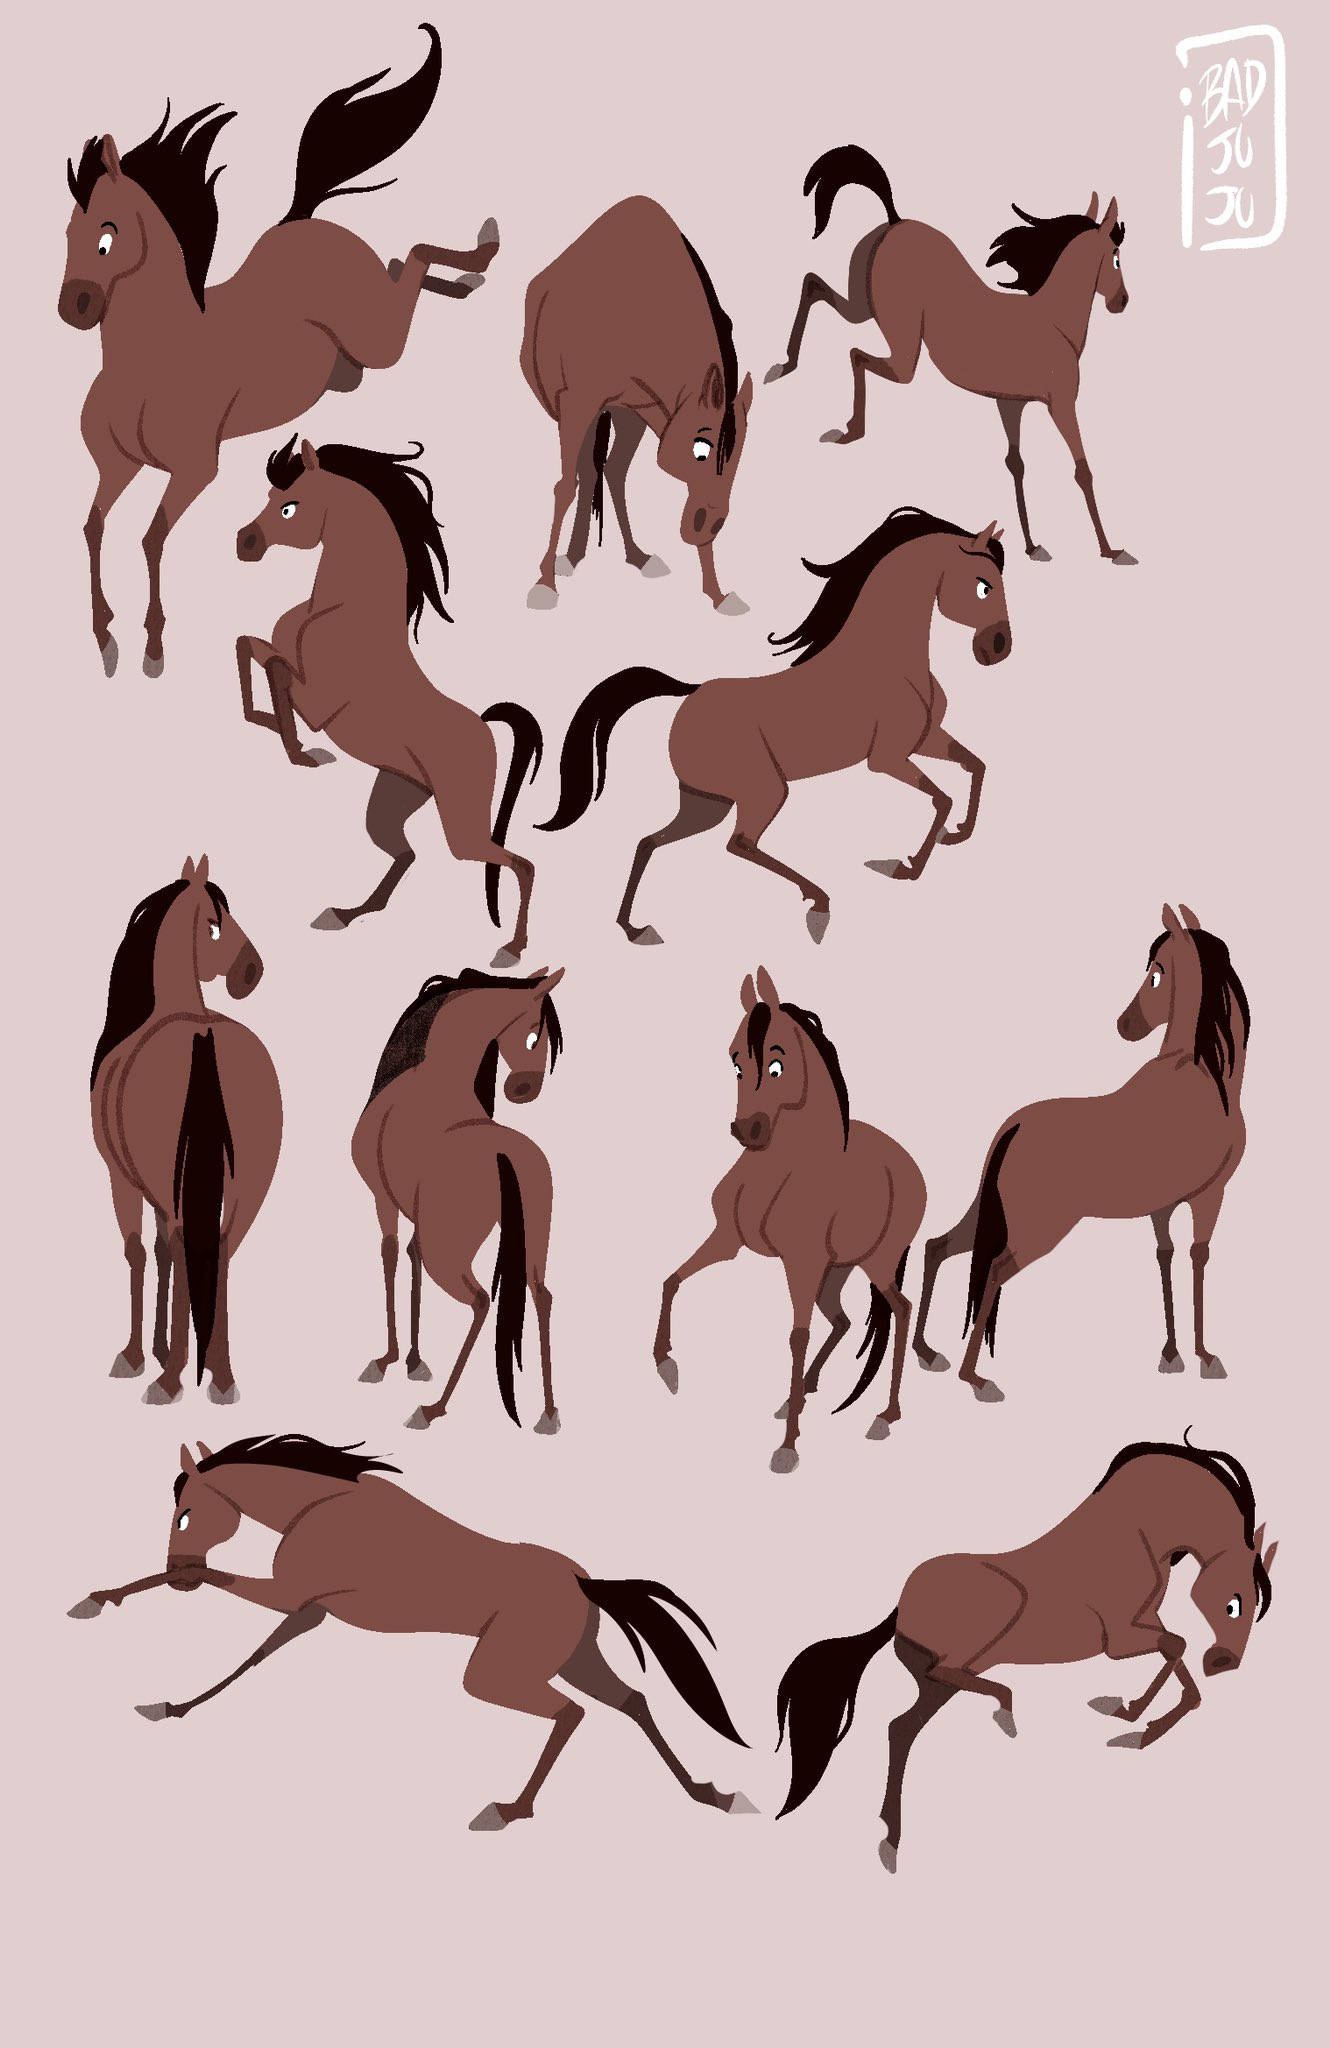 Horse Pose Poses Sketch Graphic Simply Stock Illustration 2187864099 |  Shutterstock